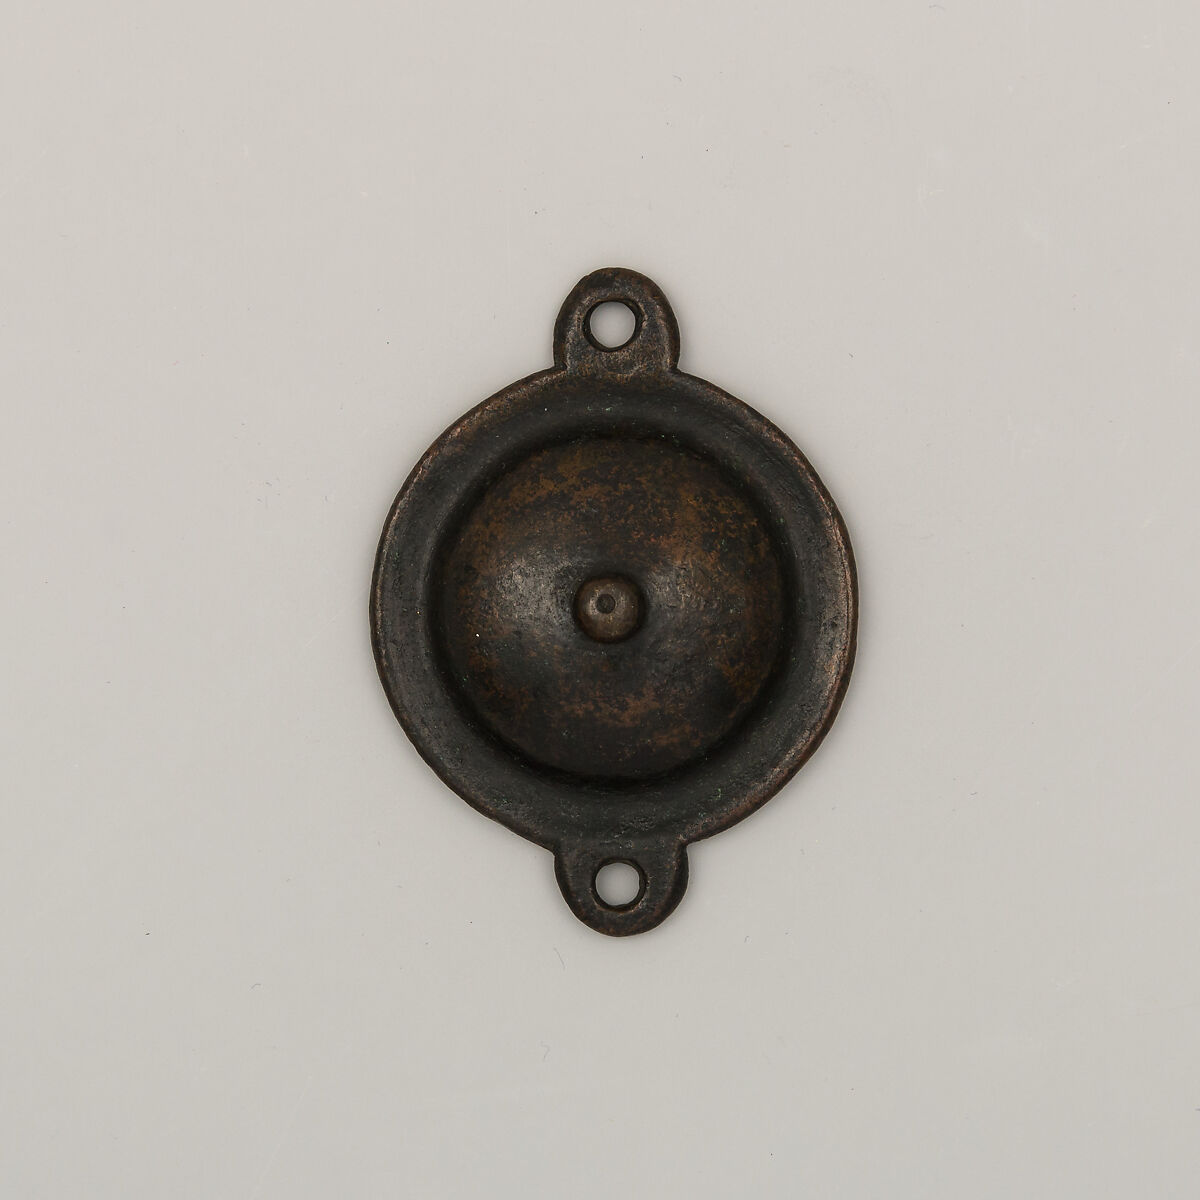 Bit Boss, Copper alloy, possibly French 